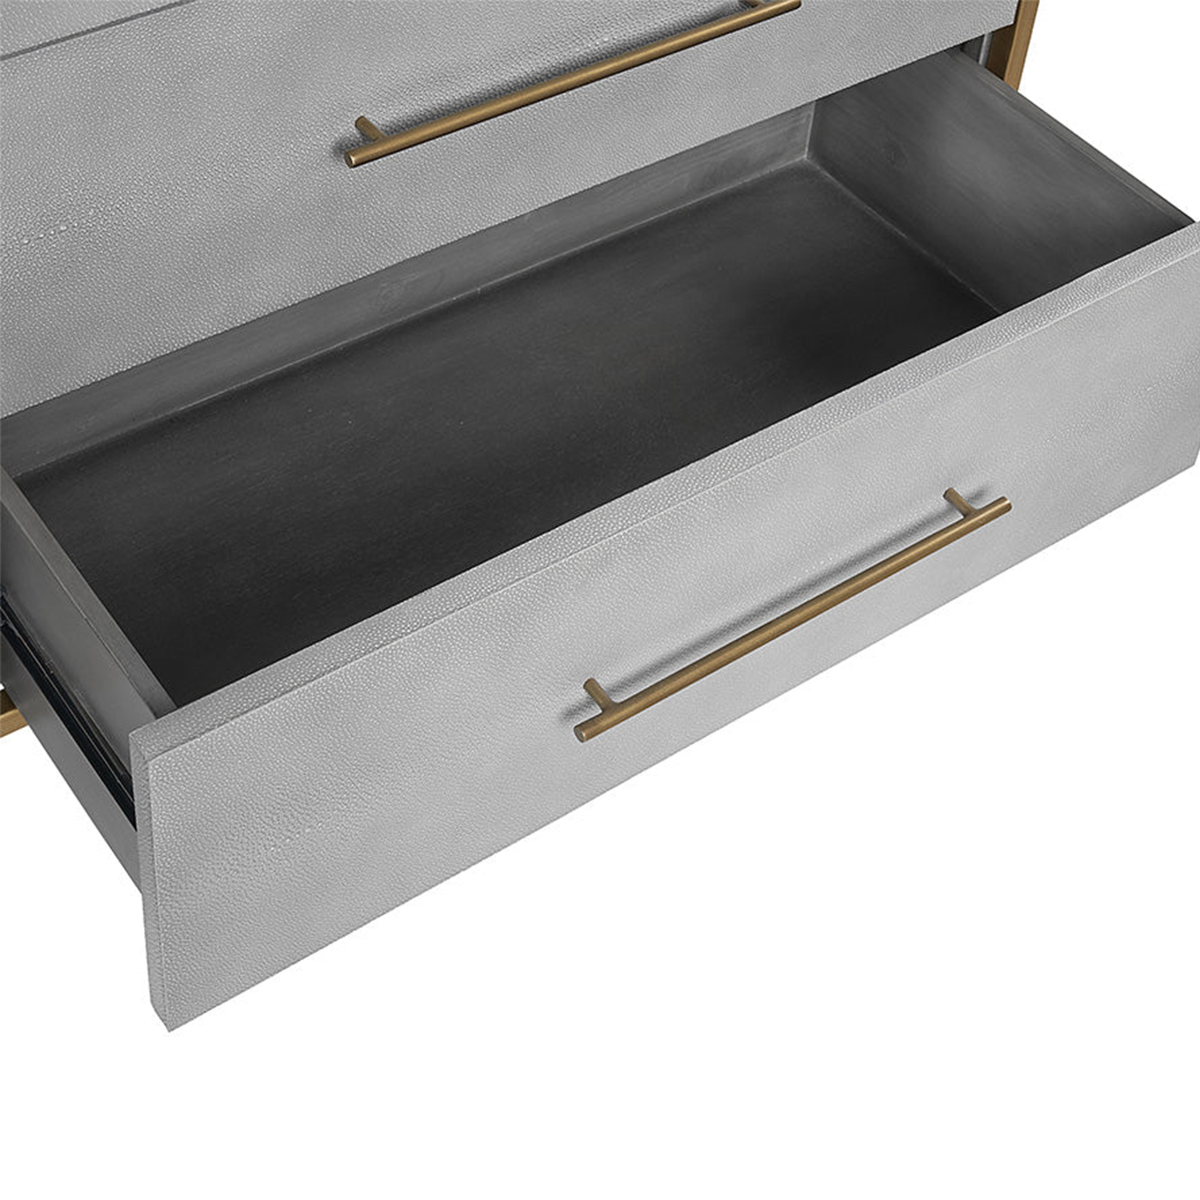 venice dresser by sunpan grey image of the drawer while its open